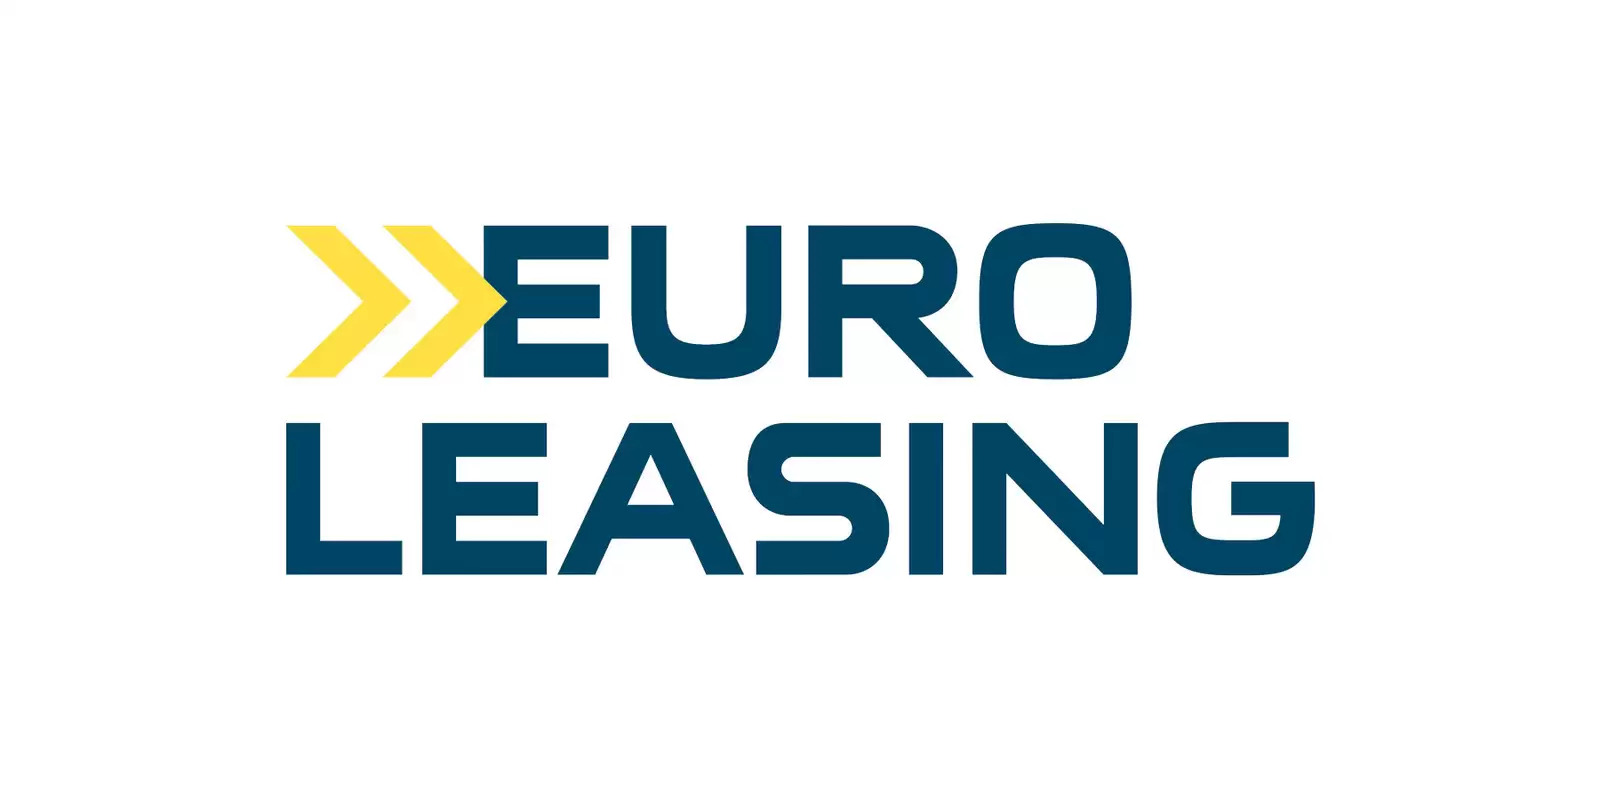 Euro-leasing (truck Business)